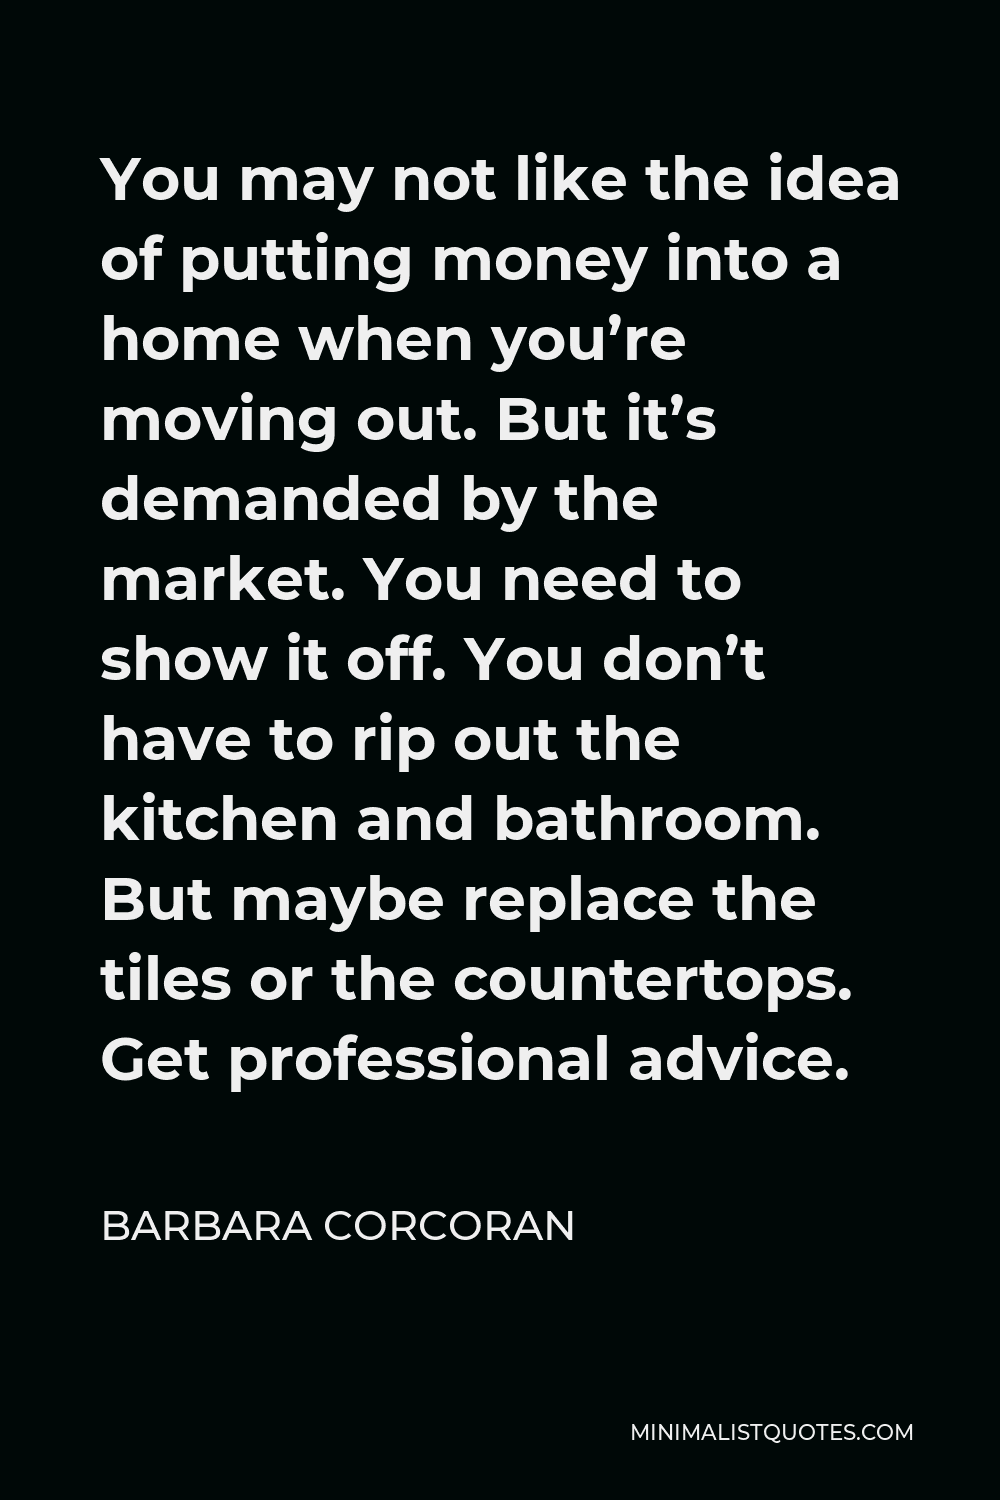 Barbara Corcoran Quote - You may not like the idea of putting money into a home when you’re moving out. But it’s demanded by the market. You need to show it off. You don’t have to rip out the kitchen and bathroom. But maybe replace the tiles or the countertops. Get professional advice.